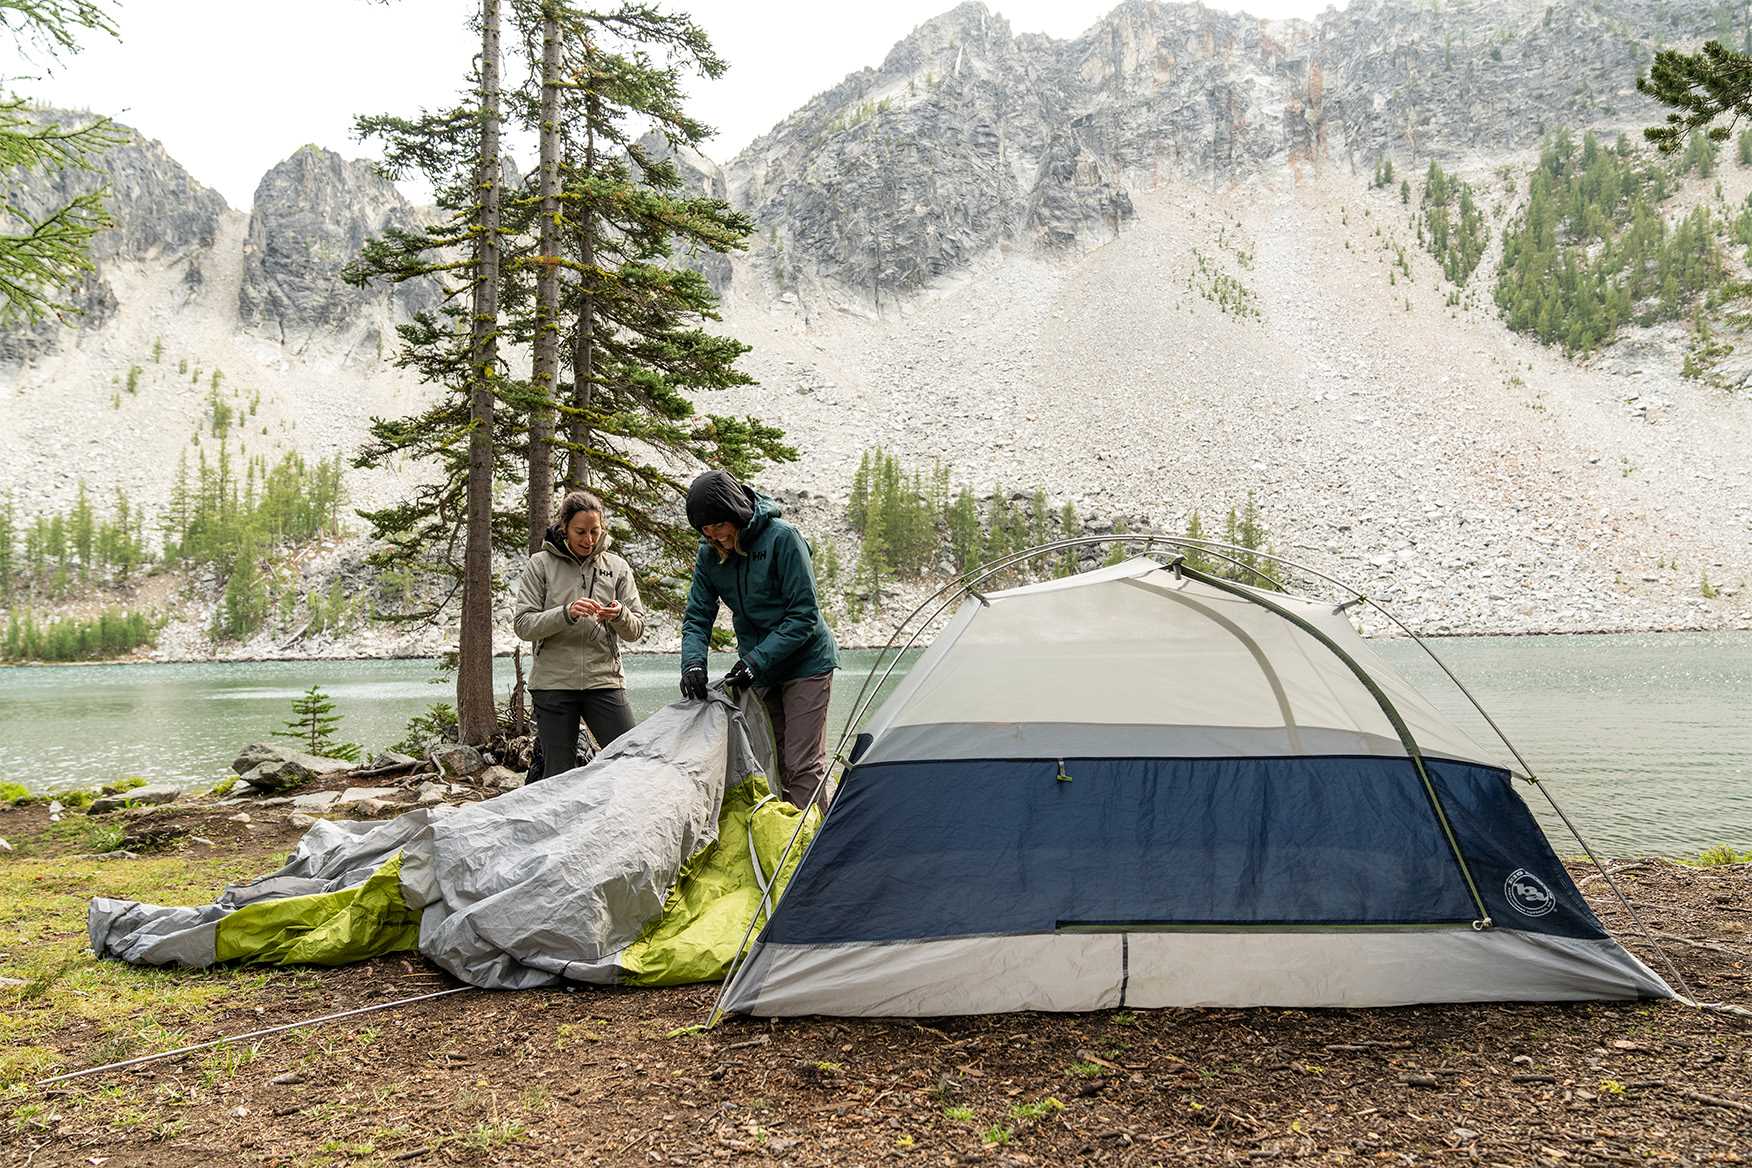 2 people setting up a tent by a lake